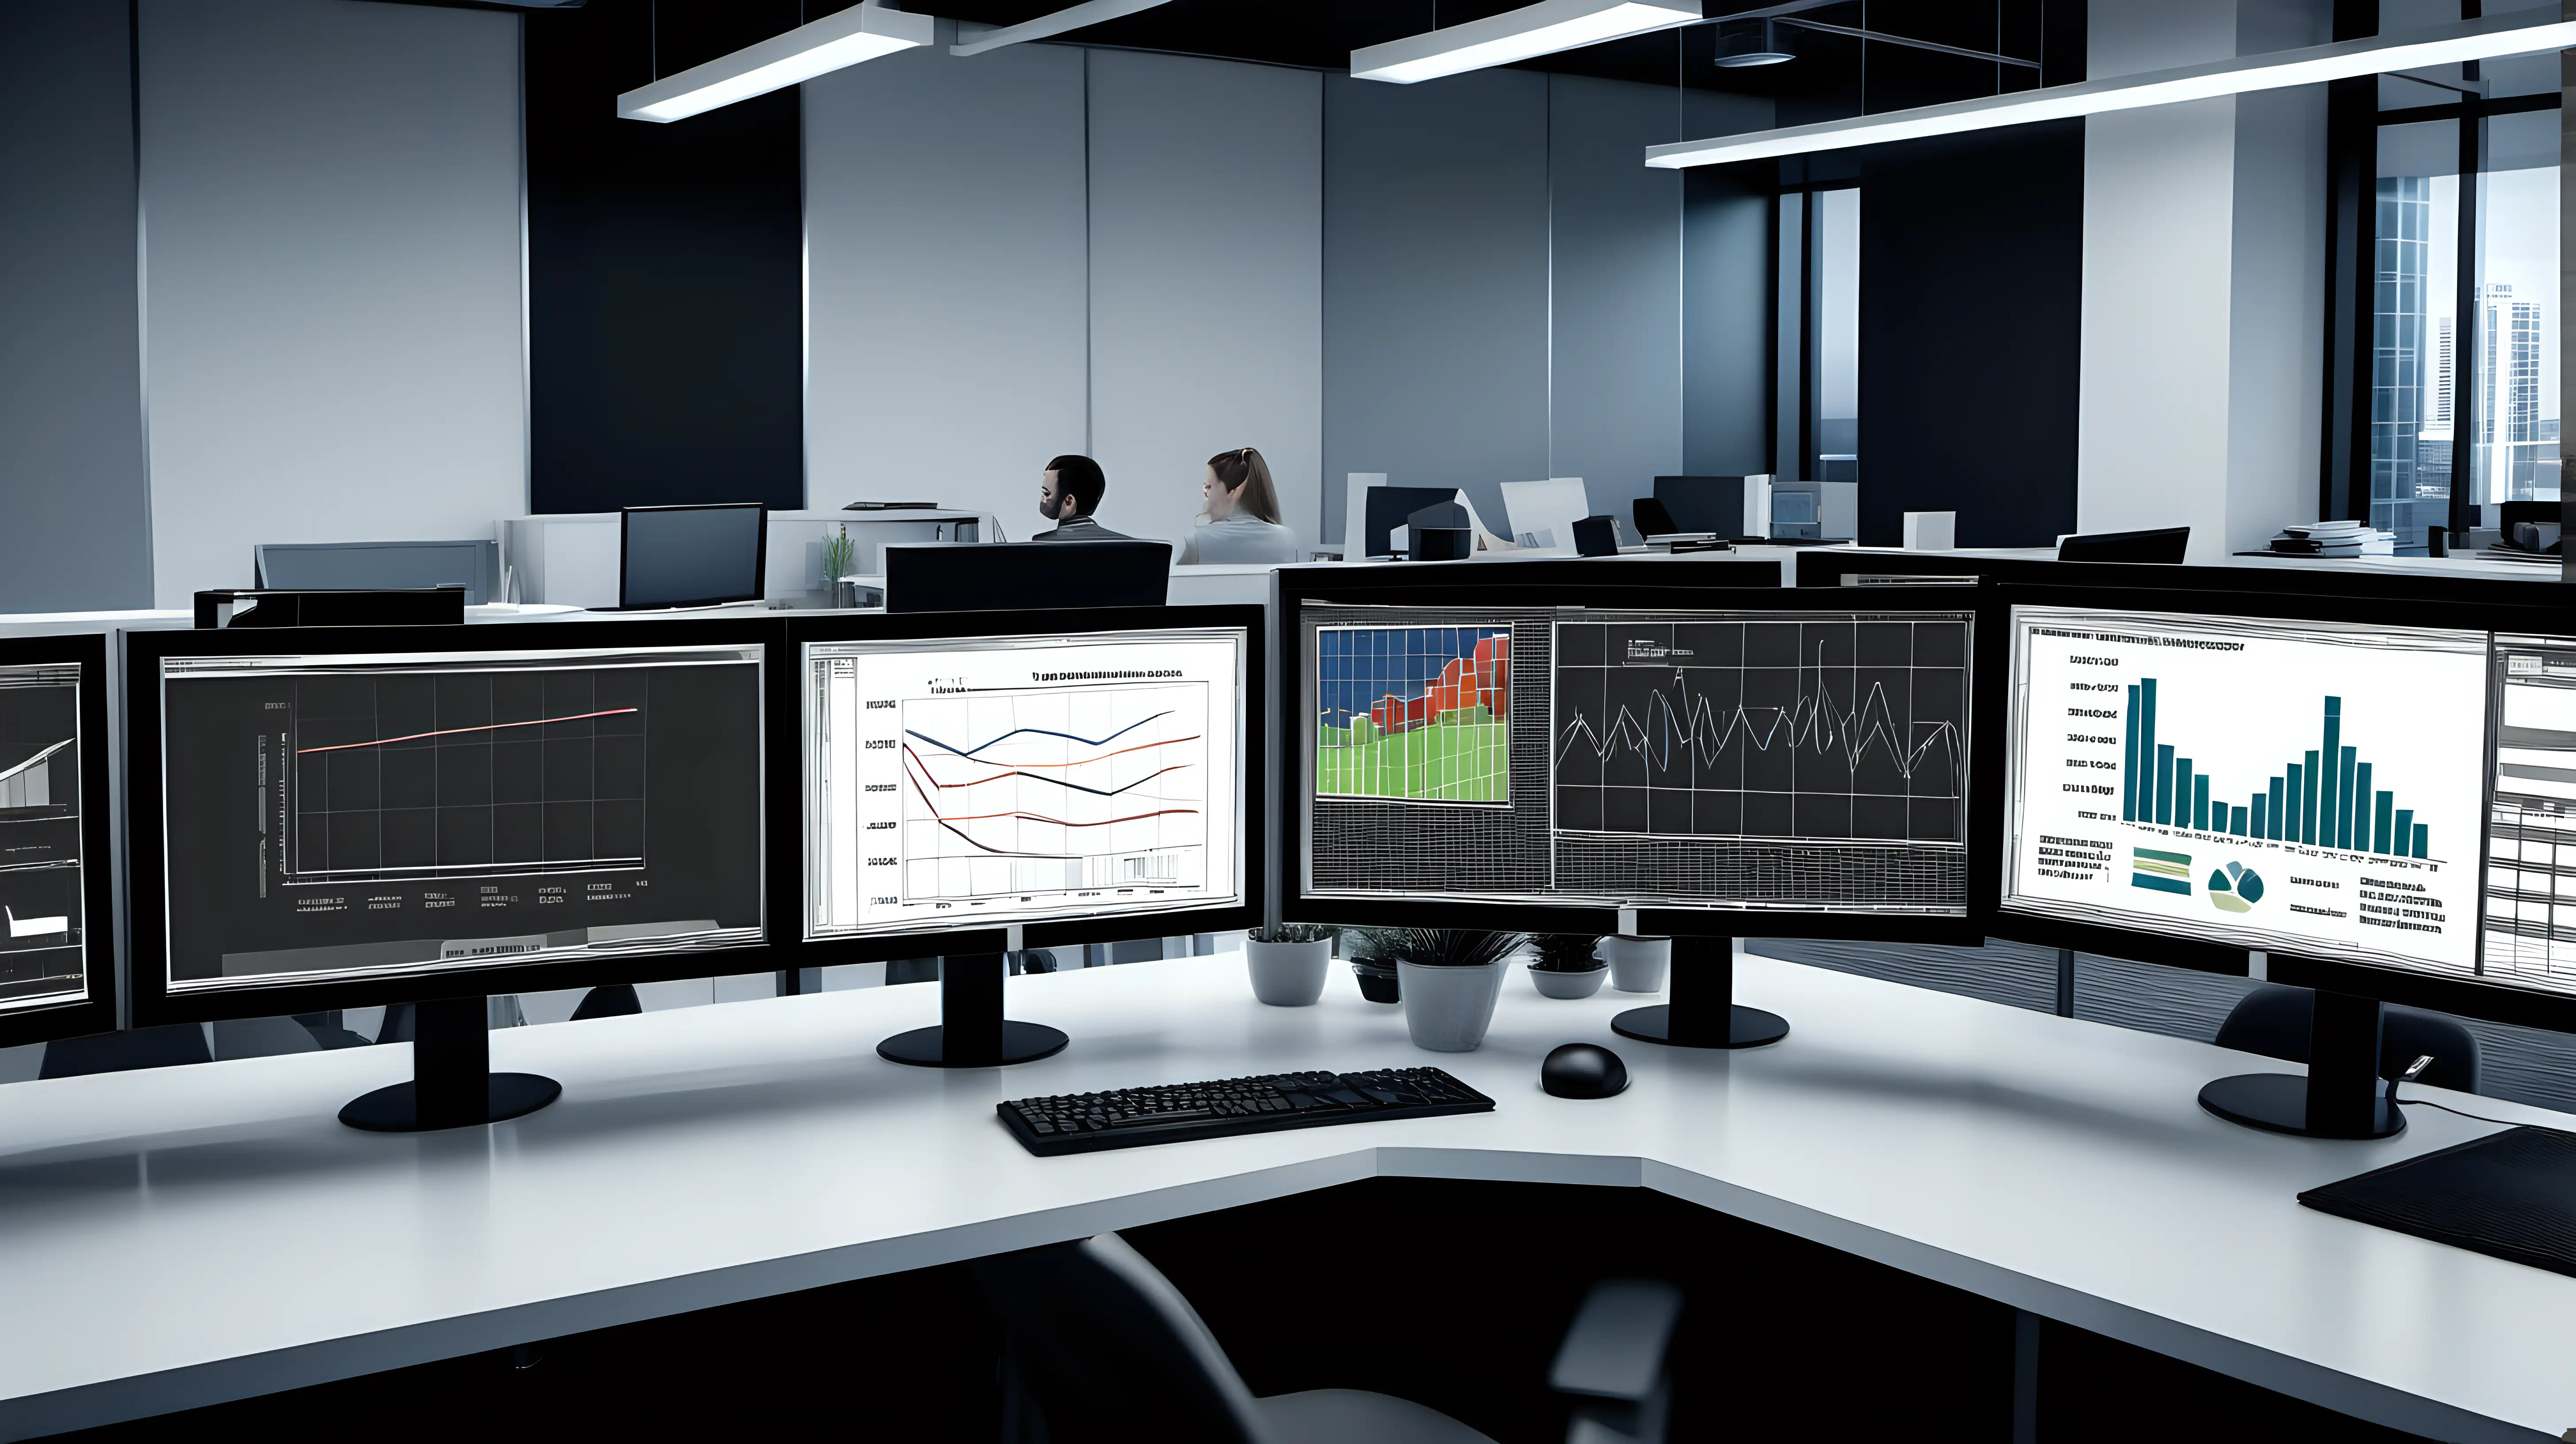 Position the camera at a moderate distance to capture the entire workspace, emphasizing the person at the computer with graphs and charts visible on the screen, providing a comprehensive view of their professional environment.